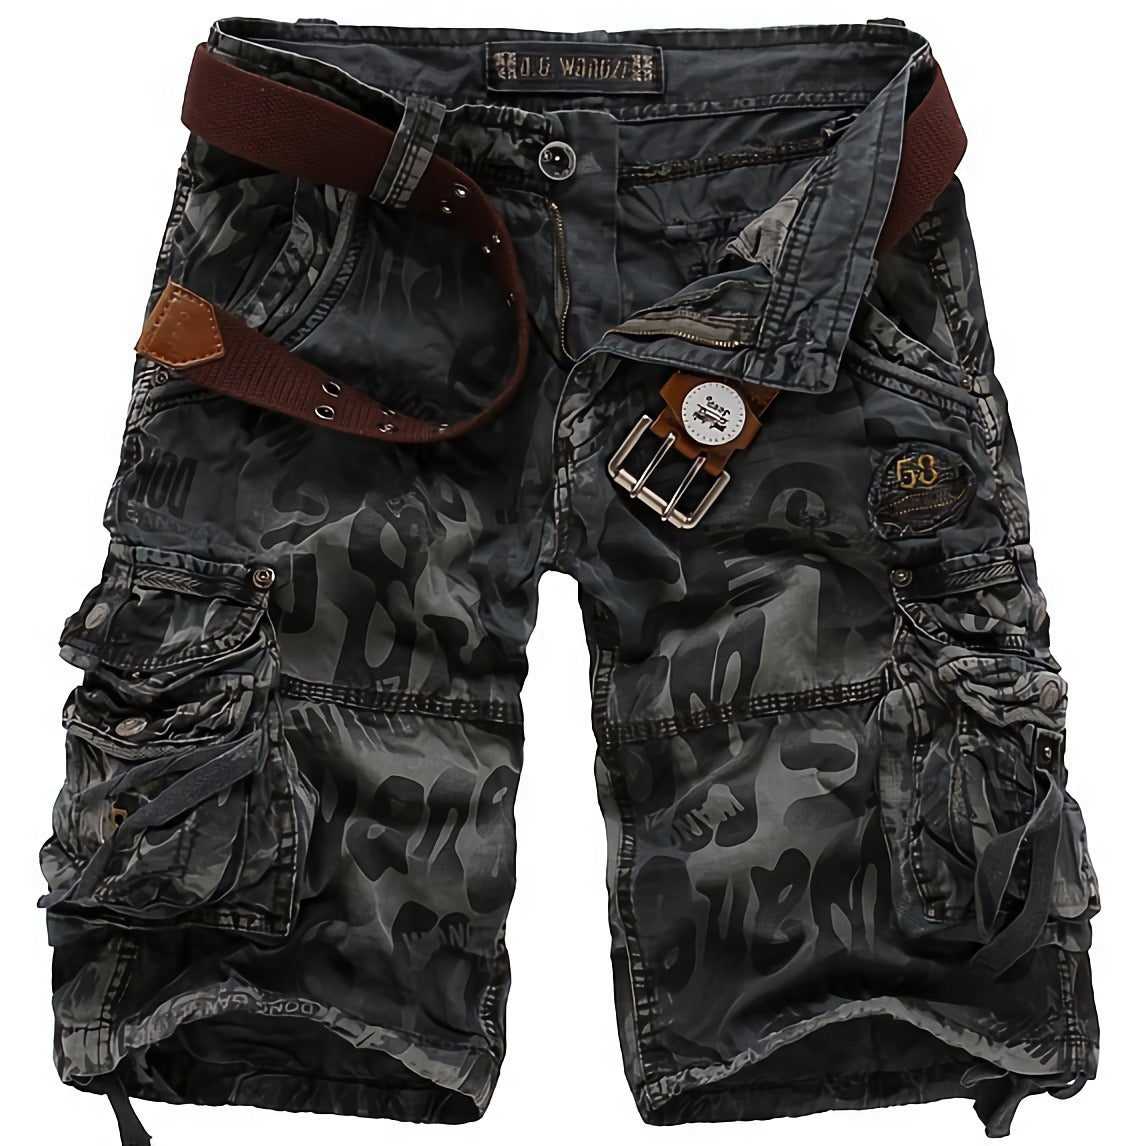 Camouflage Military Cargo Shorts / Jeans Short shorts for men / Male Aesthetic Outfits - HARD'N'HEAVY